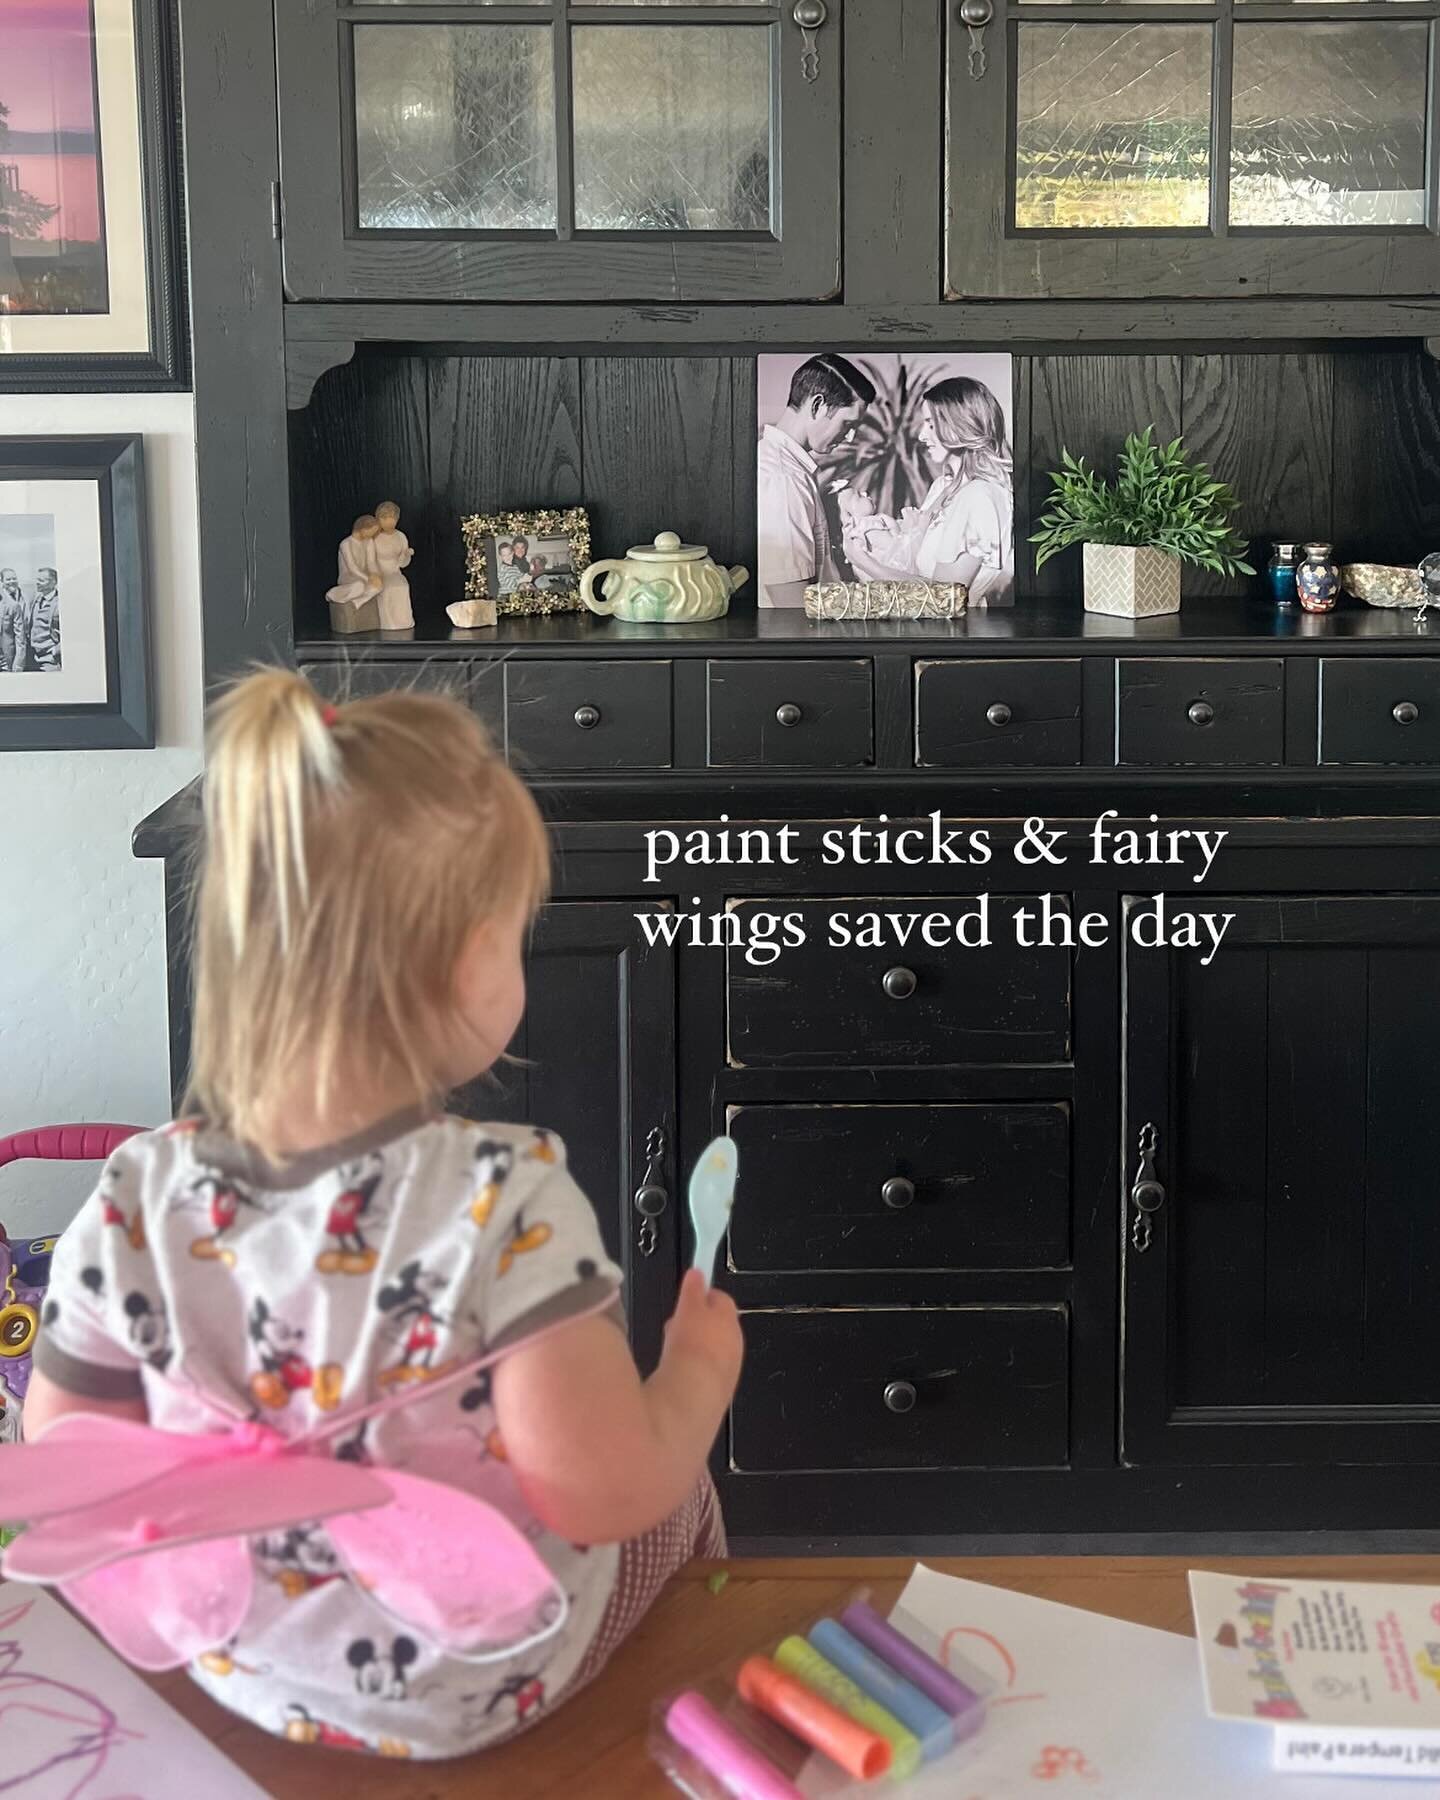 Creating a childhood that your kids don&rsquo;t have to escape from. One filled with fairy dust &amp; paint on the wood table. One where home is their safe space. 

Breastfeeding is so many things to me. Its connection. It&rsquo;s nourishment. It&rsq